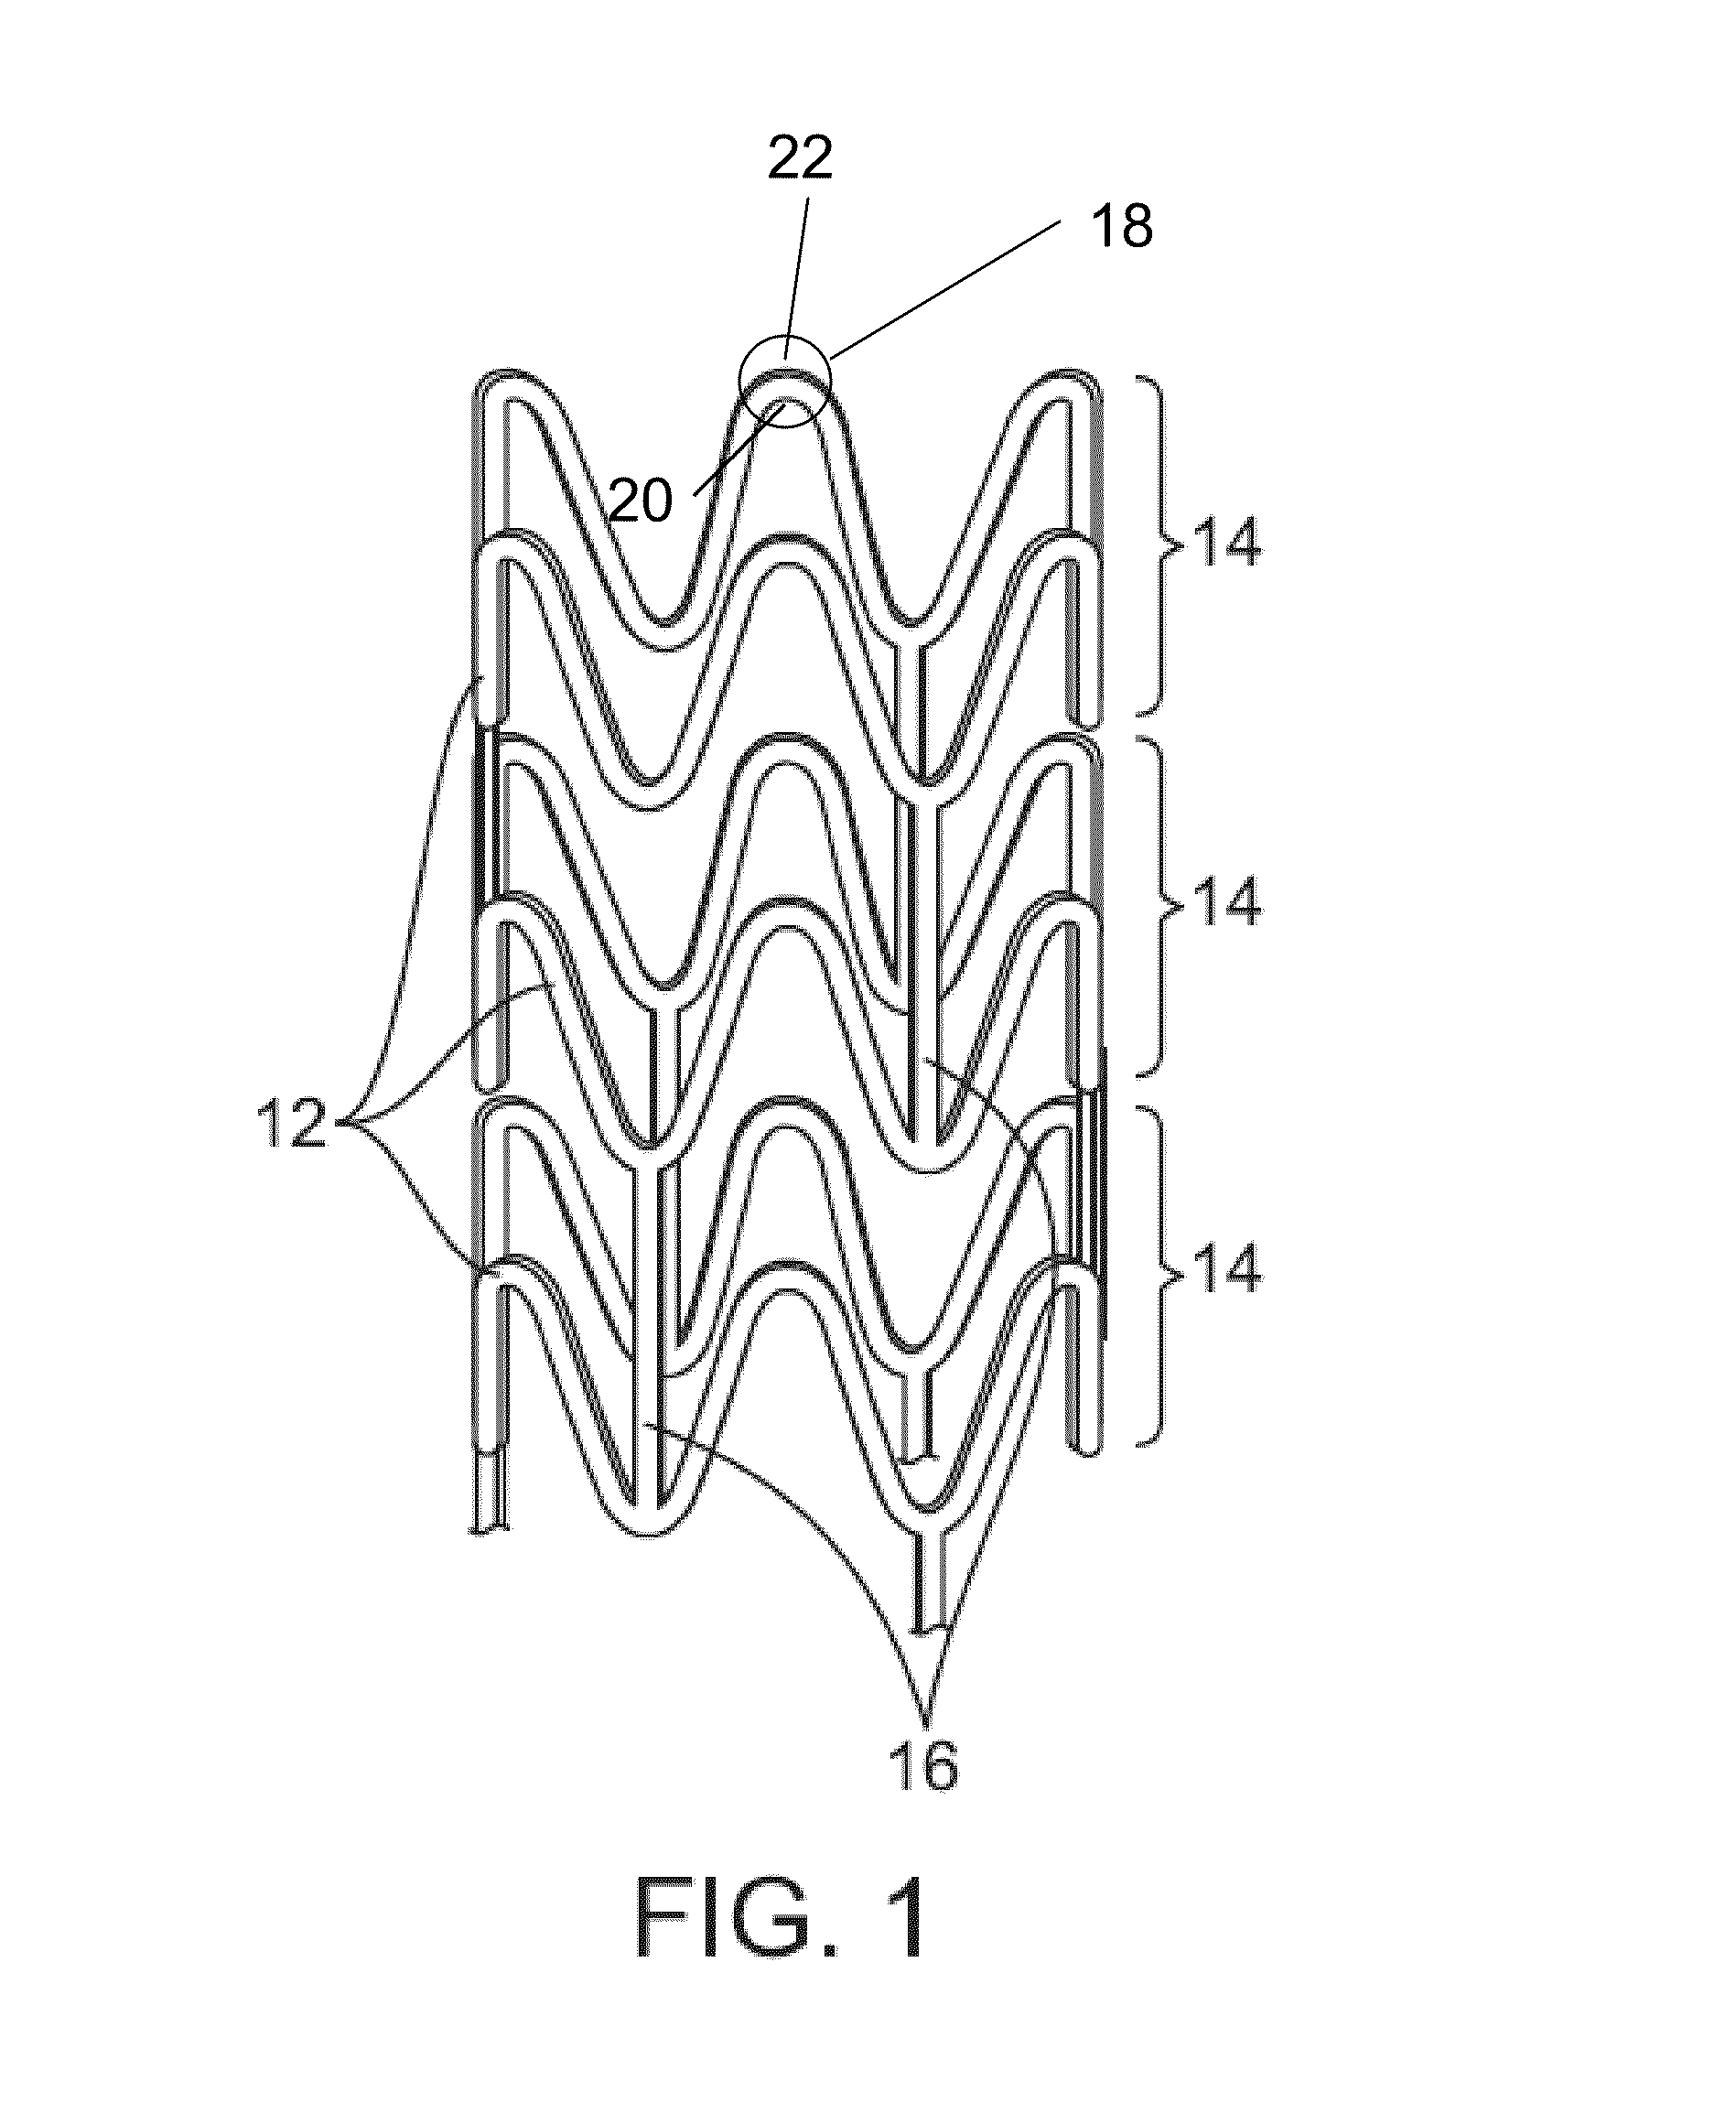 Laser system and processing conditions for manufacturing bioabsorbable stents